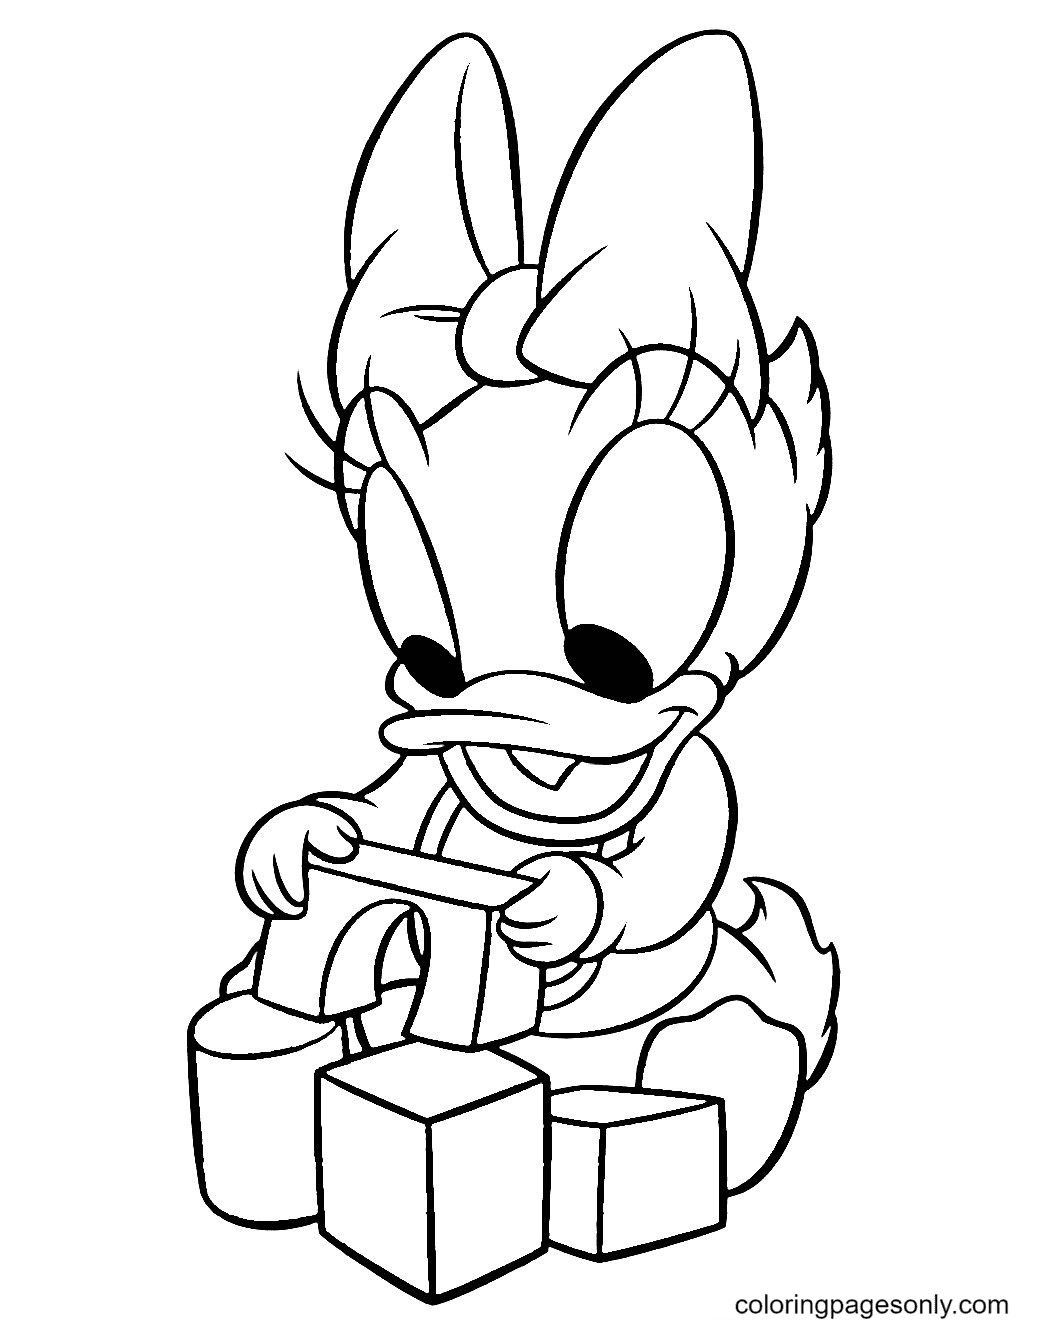 Daisy Duck drawing by DisneyfanGirly on DeviantArt